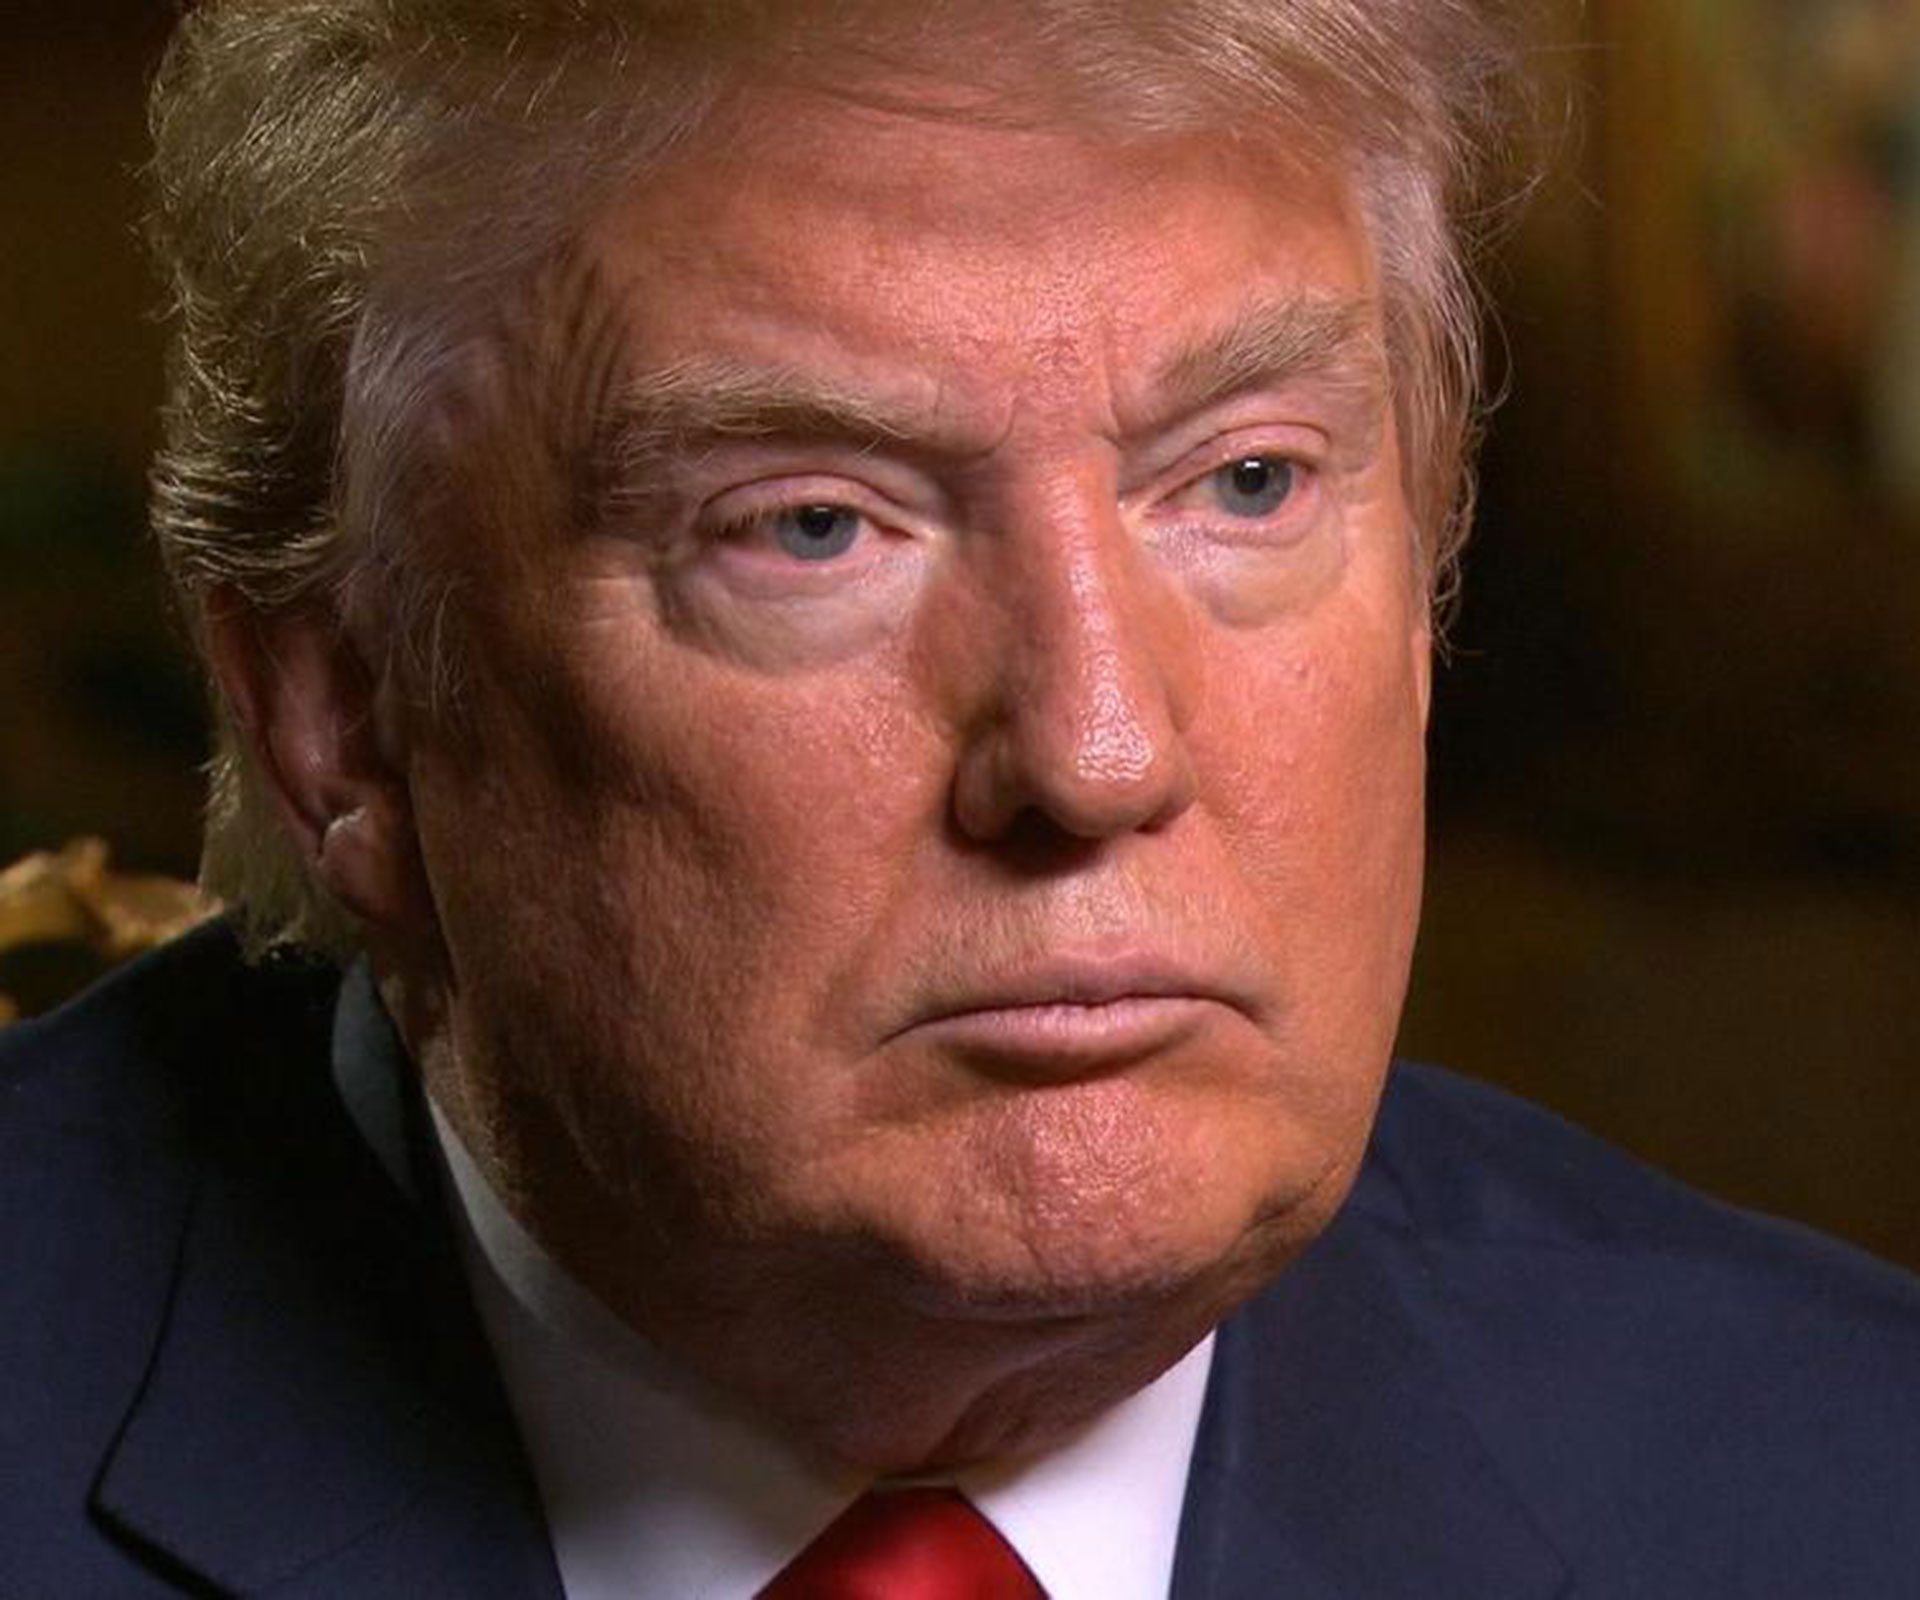 Donald Trump says he’ll deport up to three million undocumented immigrants “immediately”